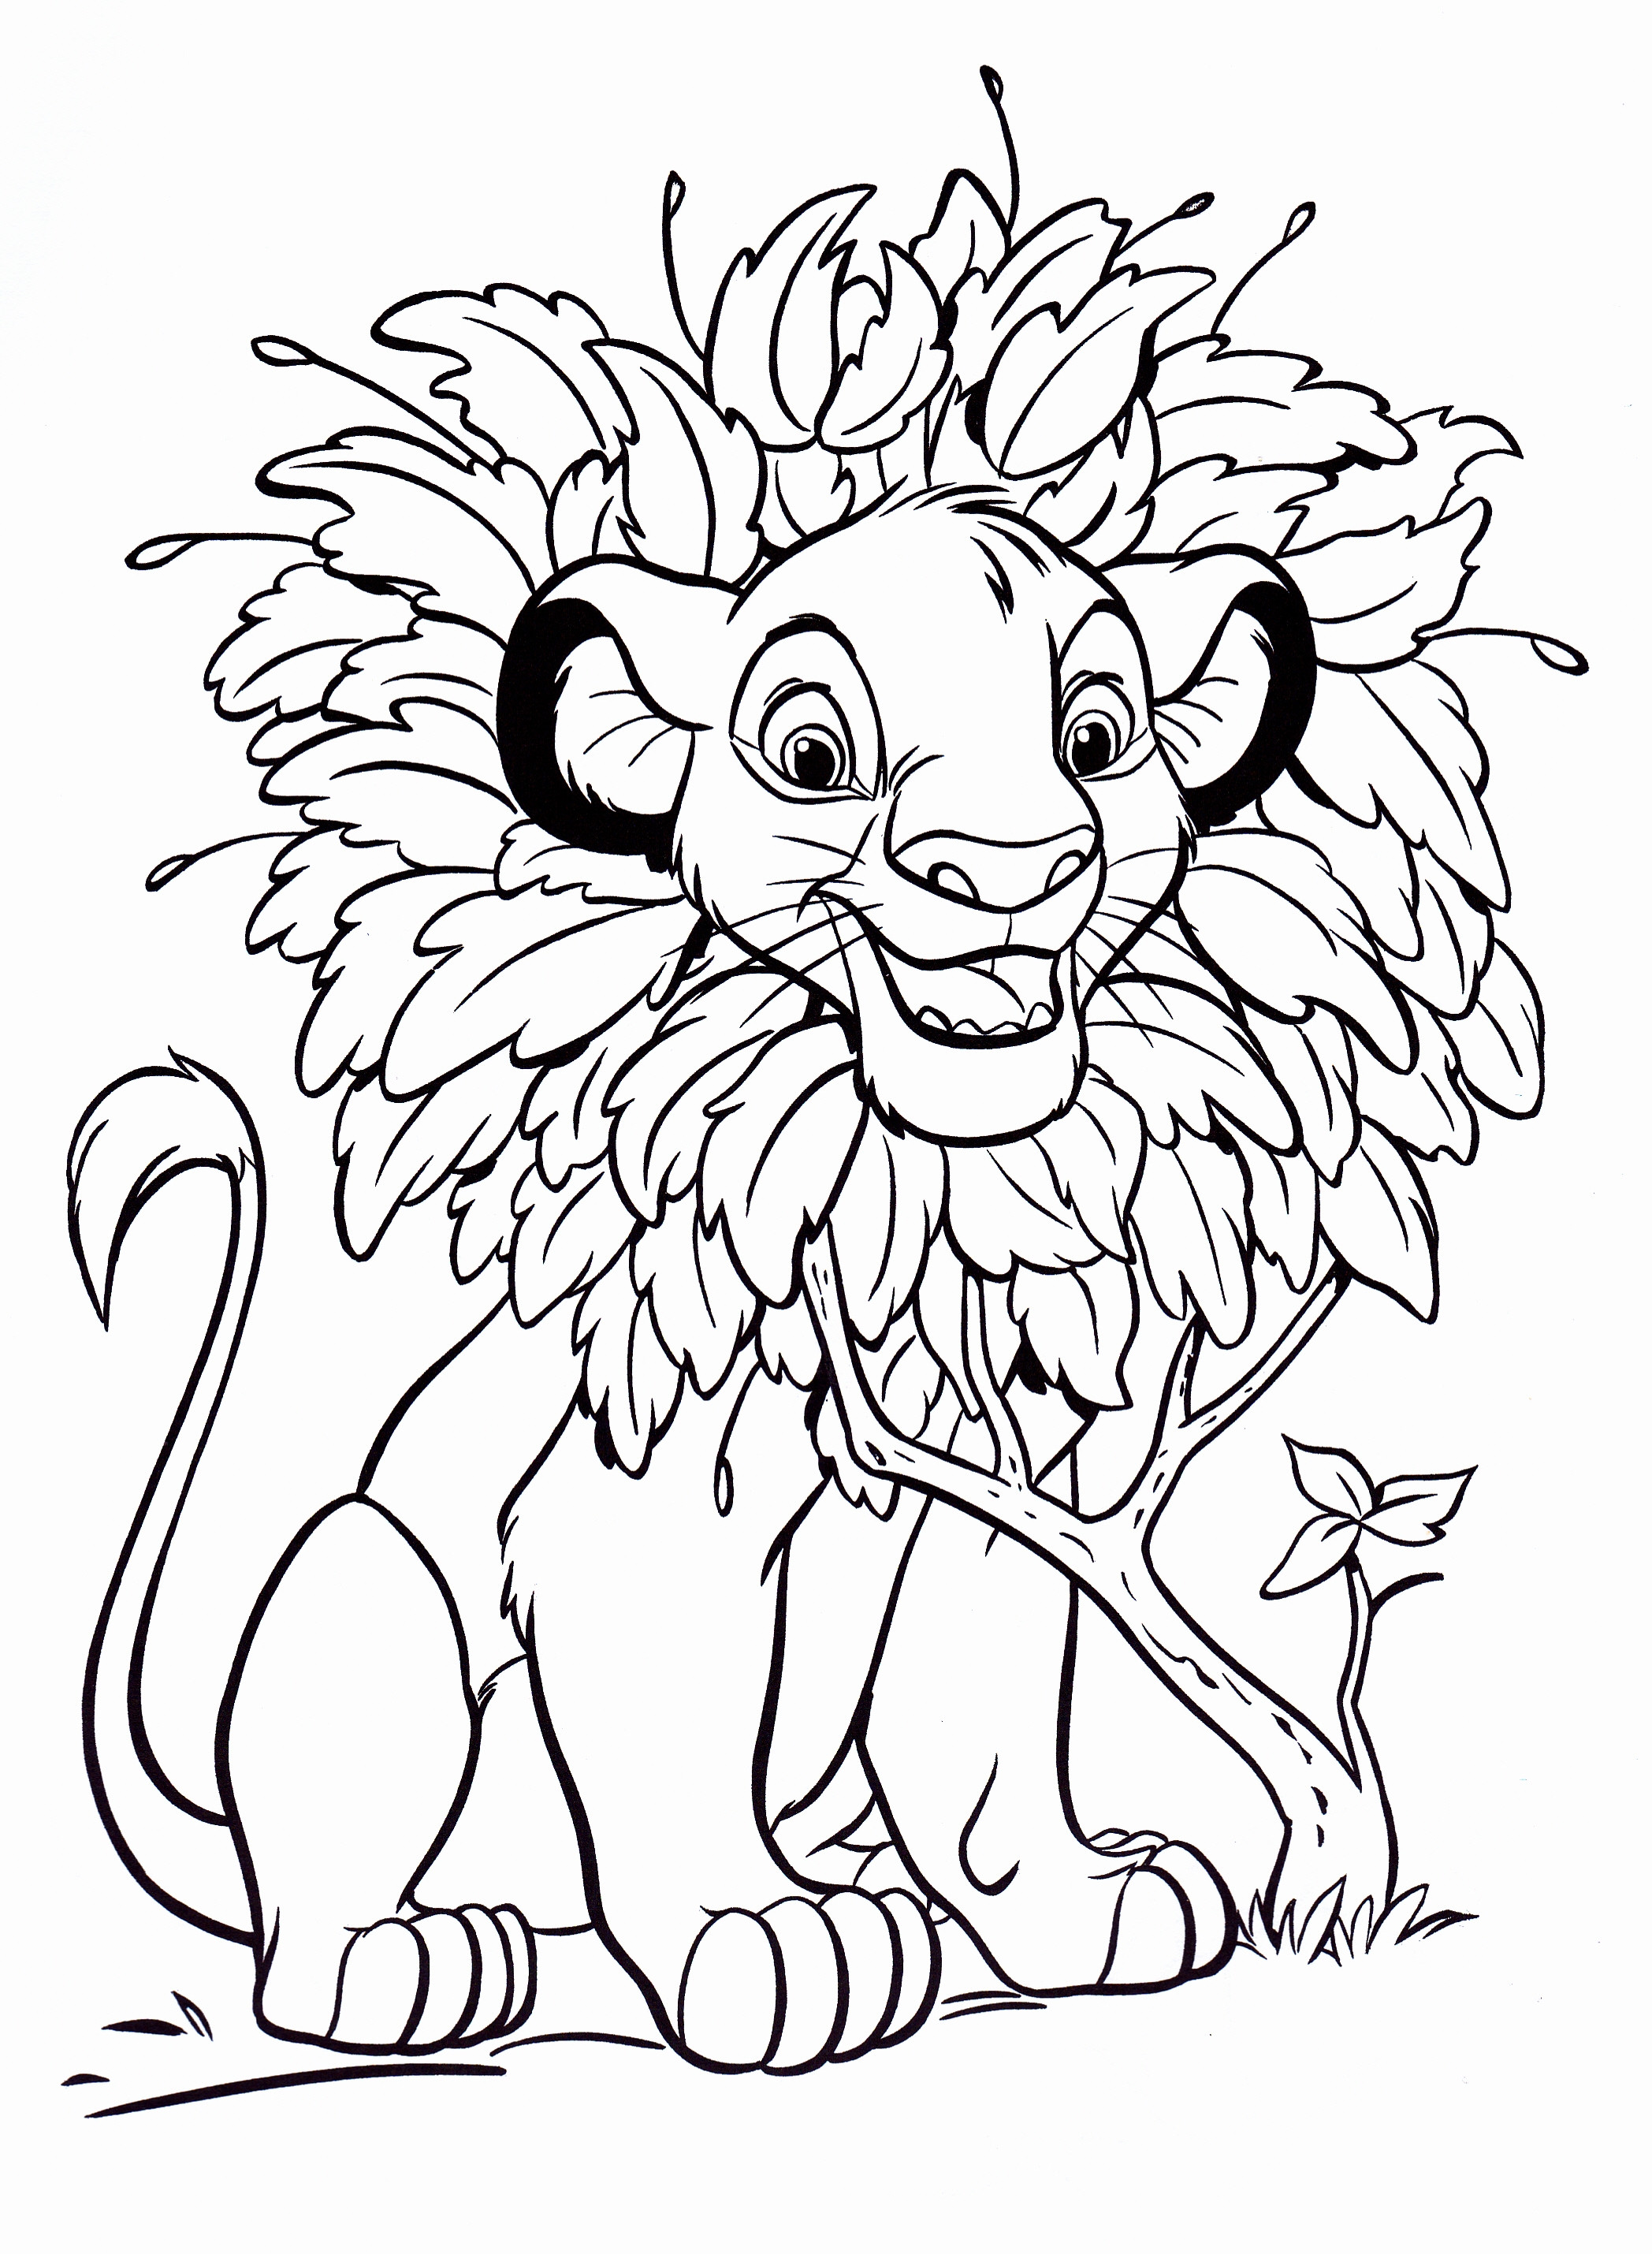 Free Downloadable Coloring Pages For Toddlers
 Free Printable Simba Coloring Pages For Kids